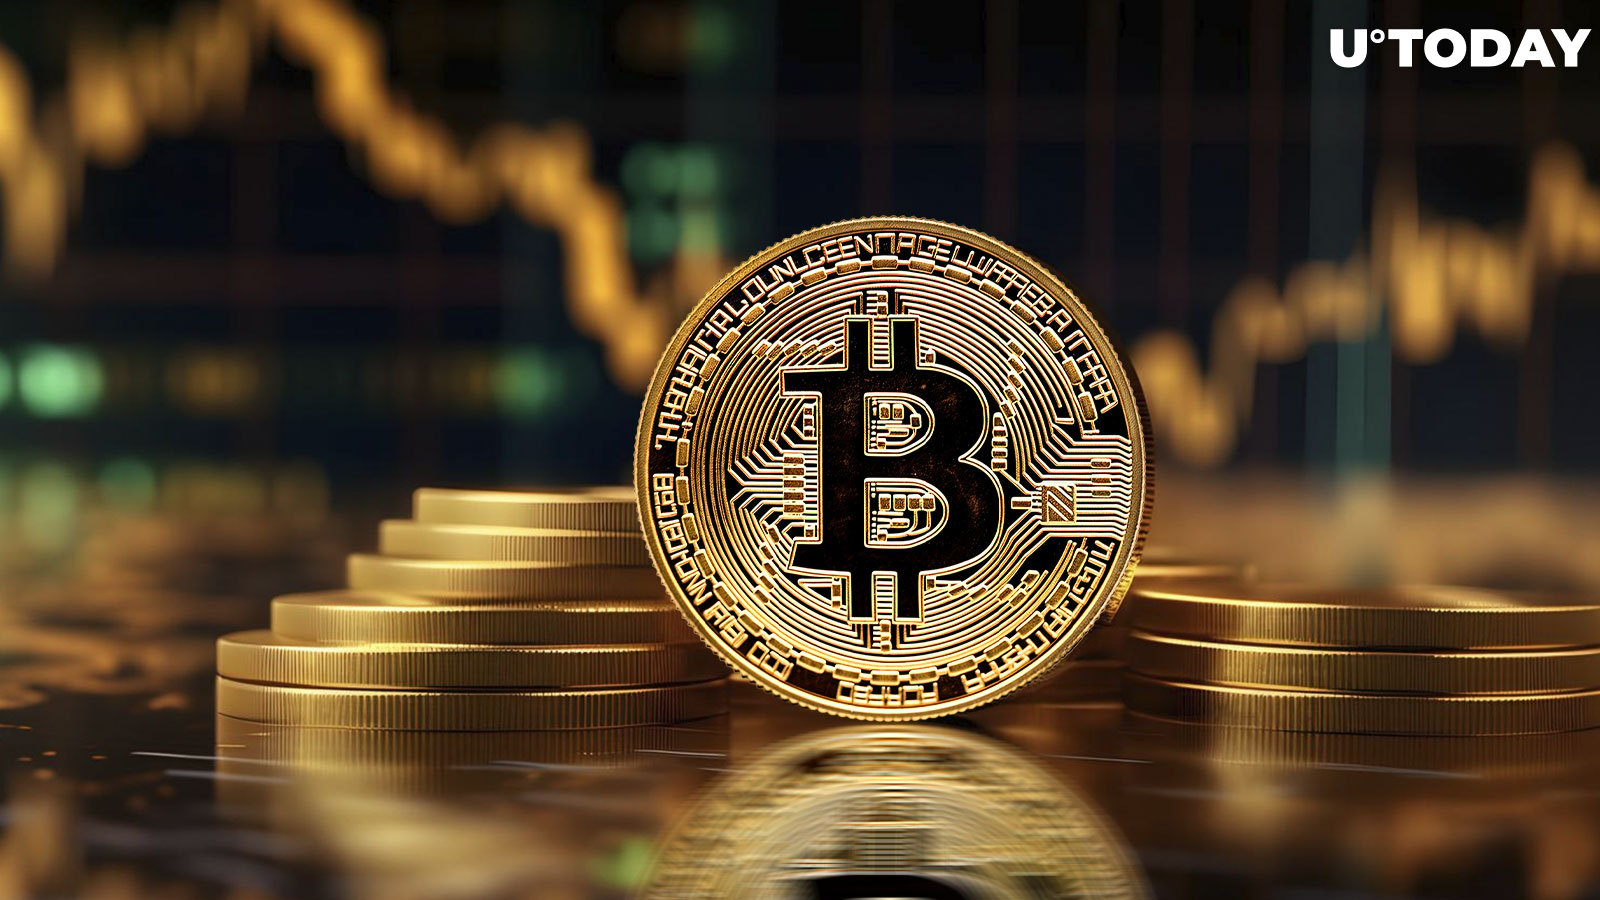 Bitcoin (BTC) Regains $60,000 as Crucial Metric Points for Price Rebound